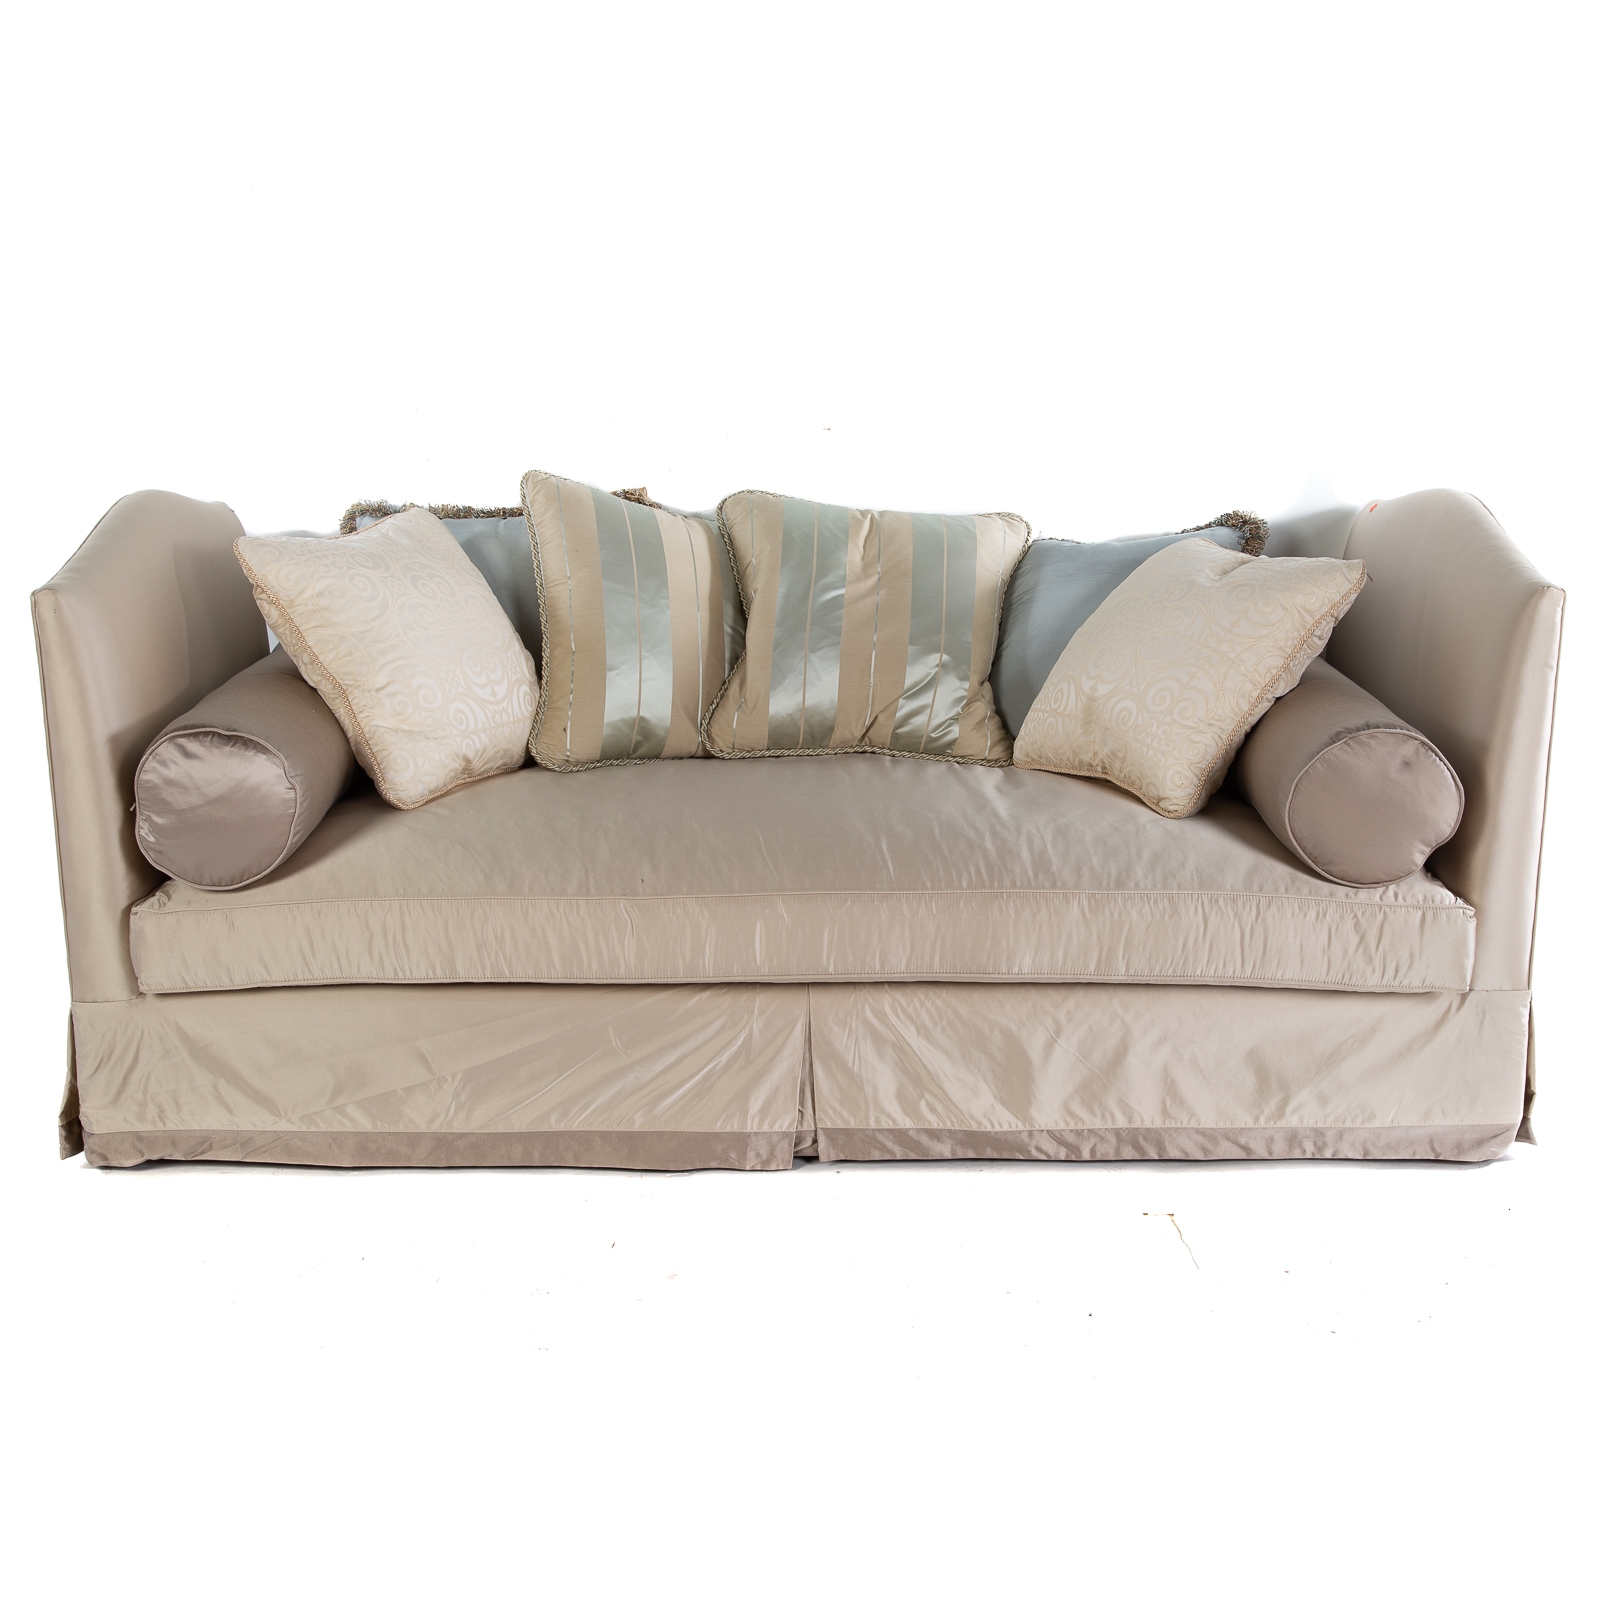 SWAIN SILK UPHOLSTERED DAY BED 288706